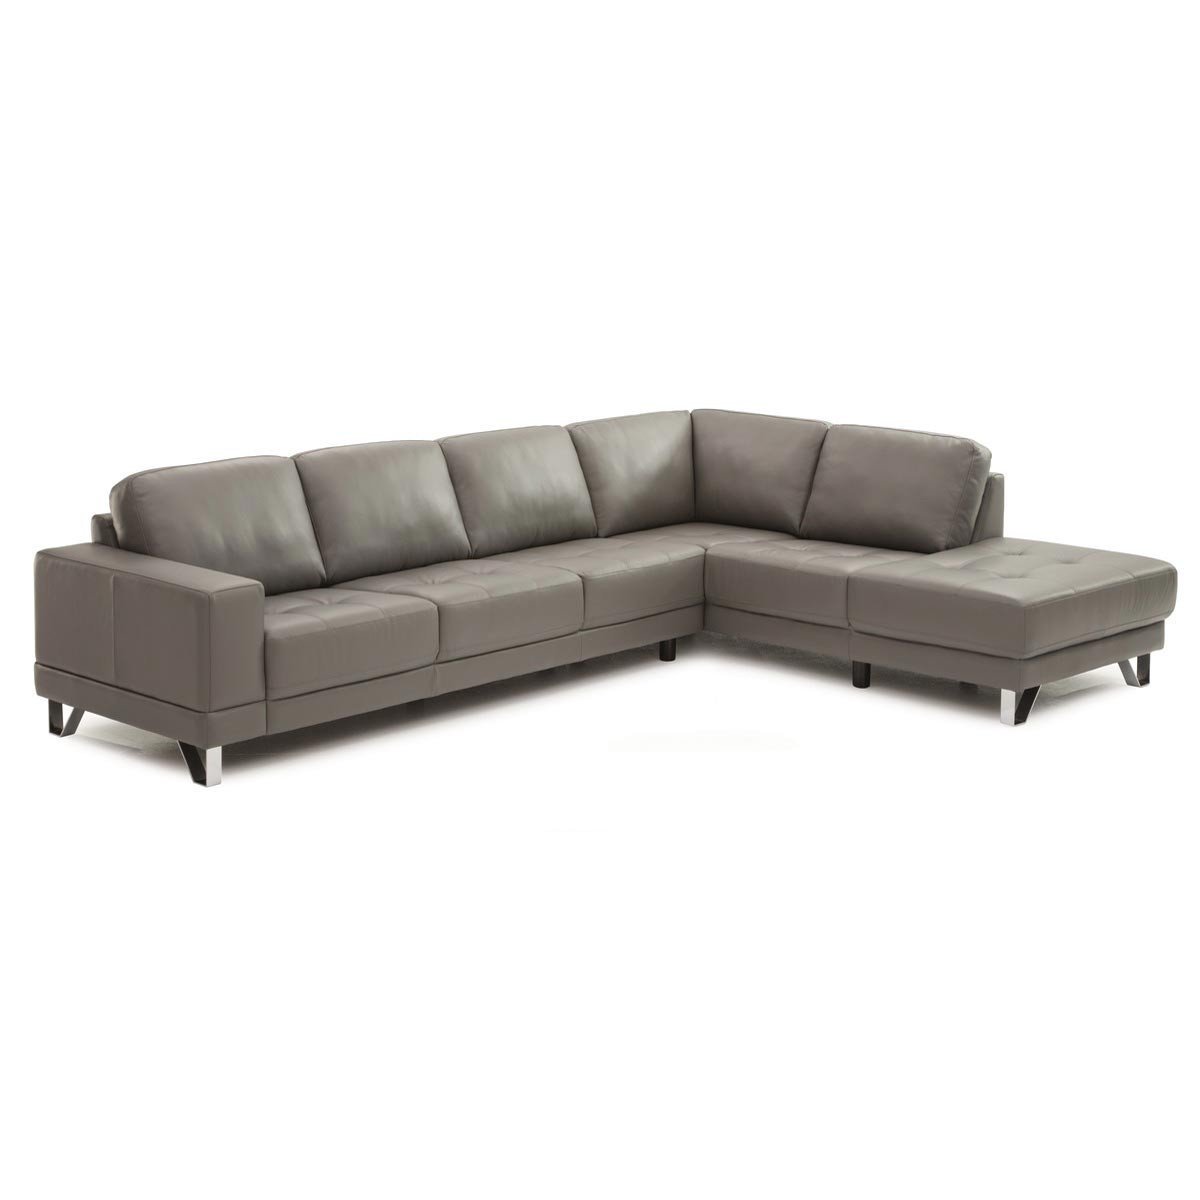 Palliser Seattle Sectional From 1 768, Palliser Leather Couch